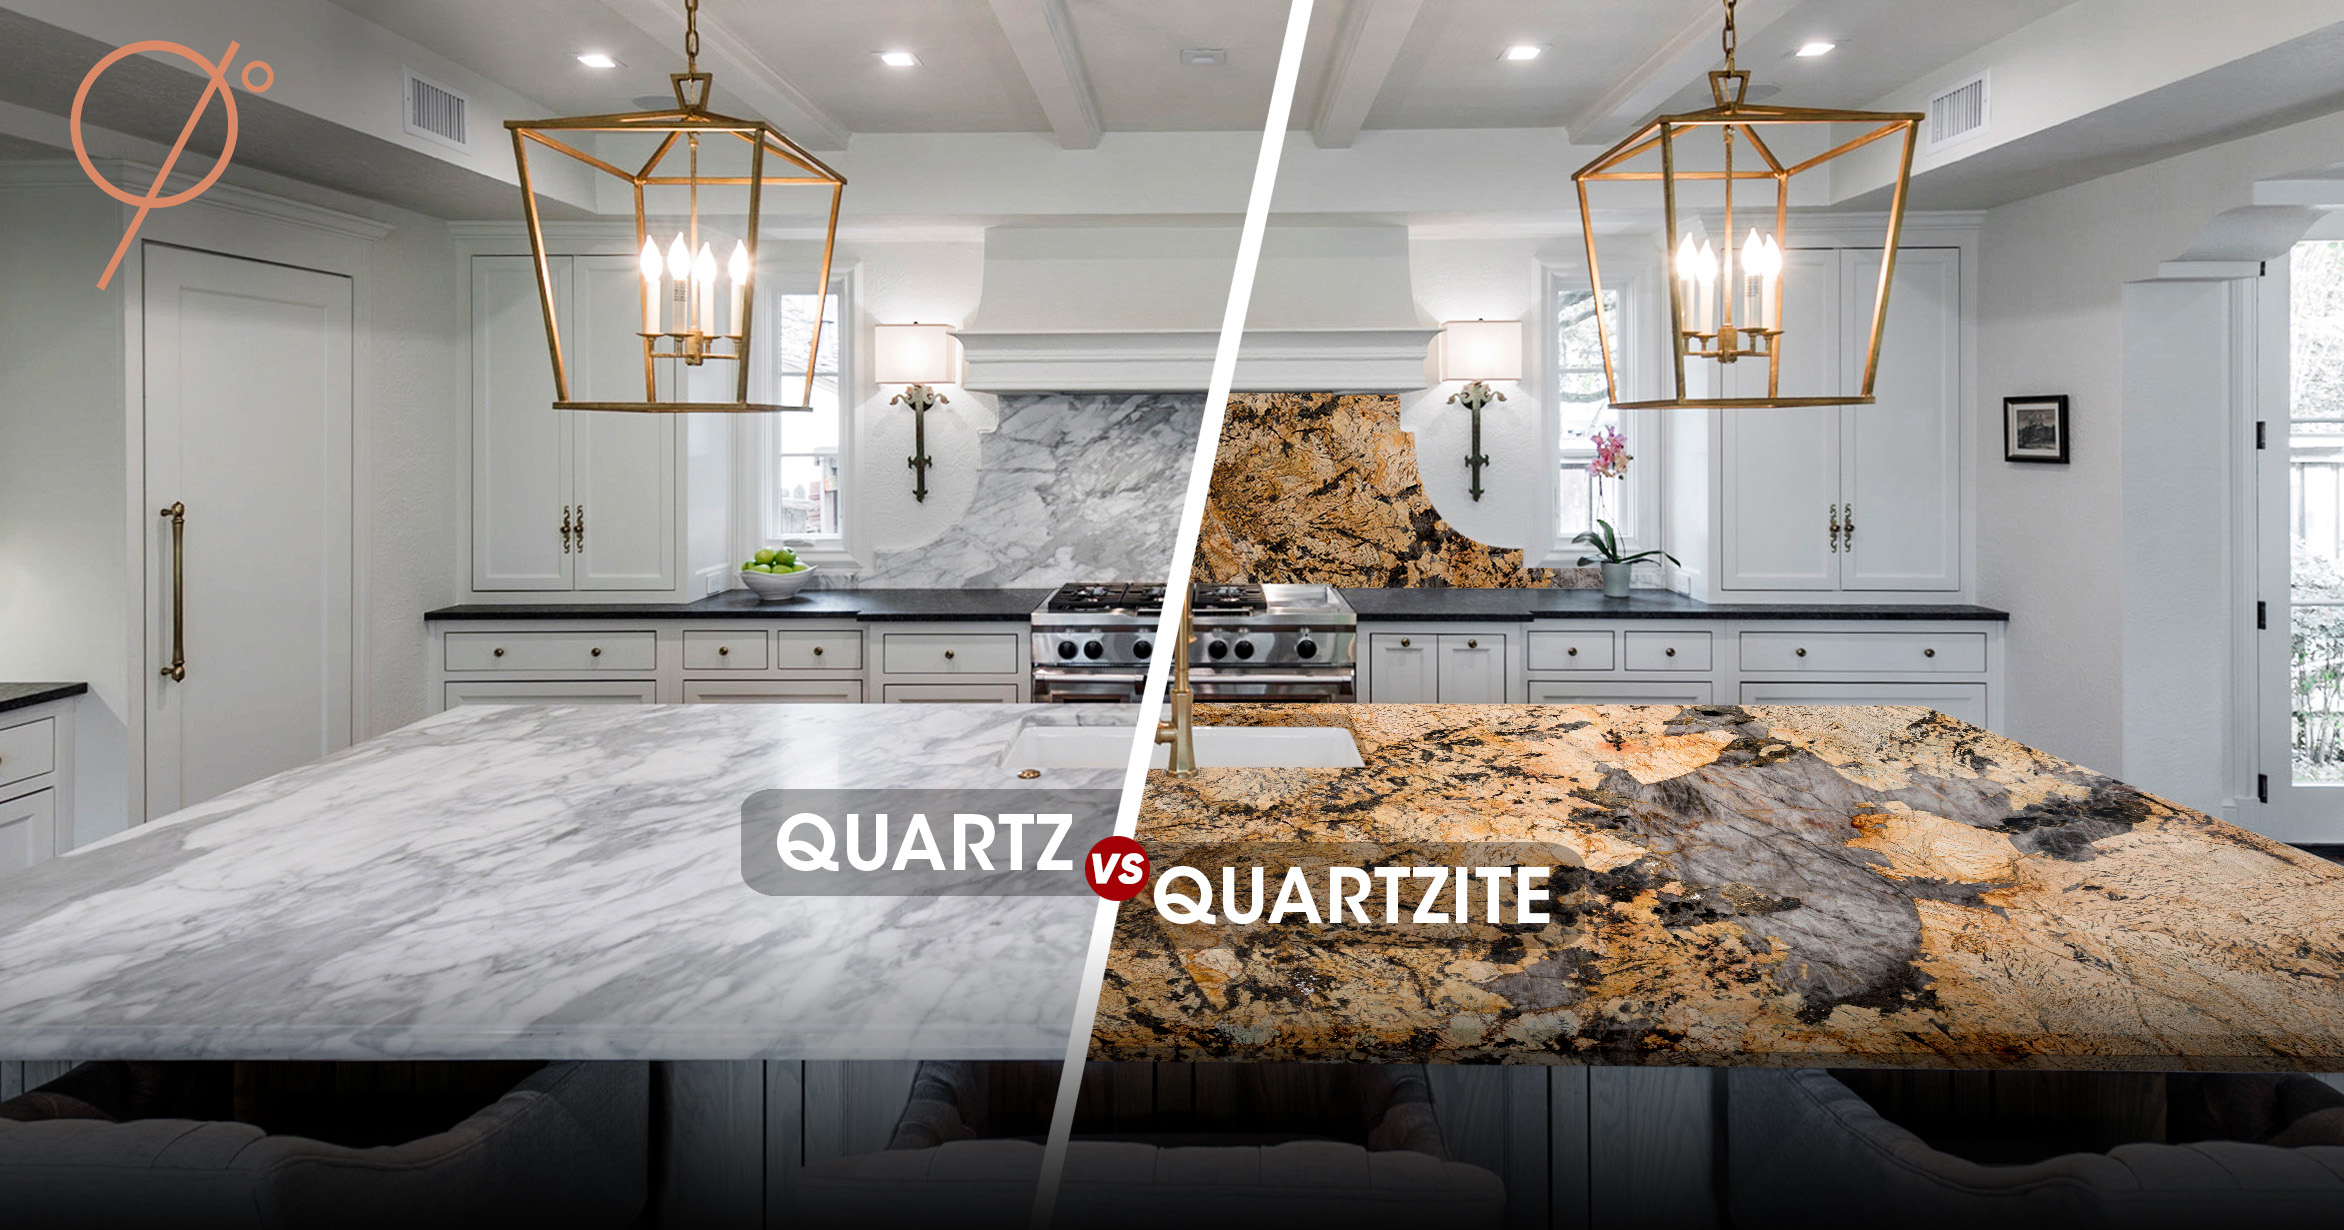 what's the difference between quartz and quartzite?